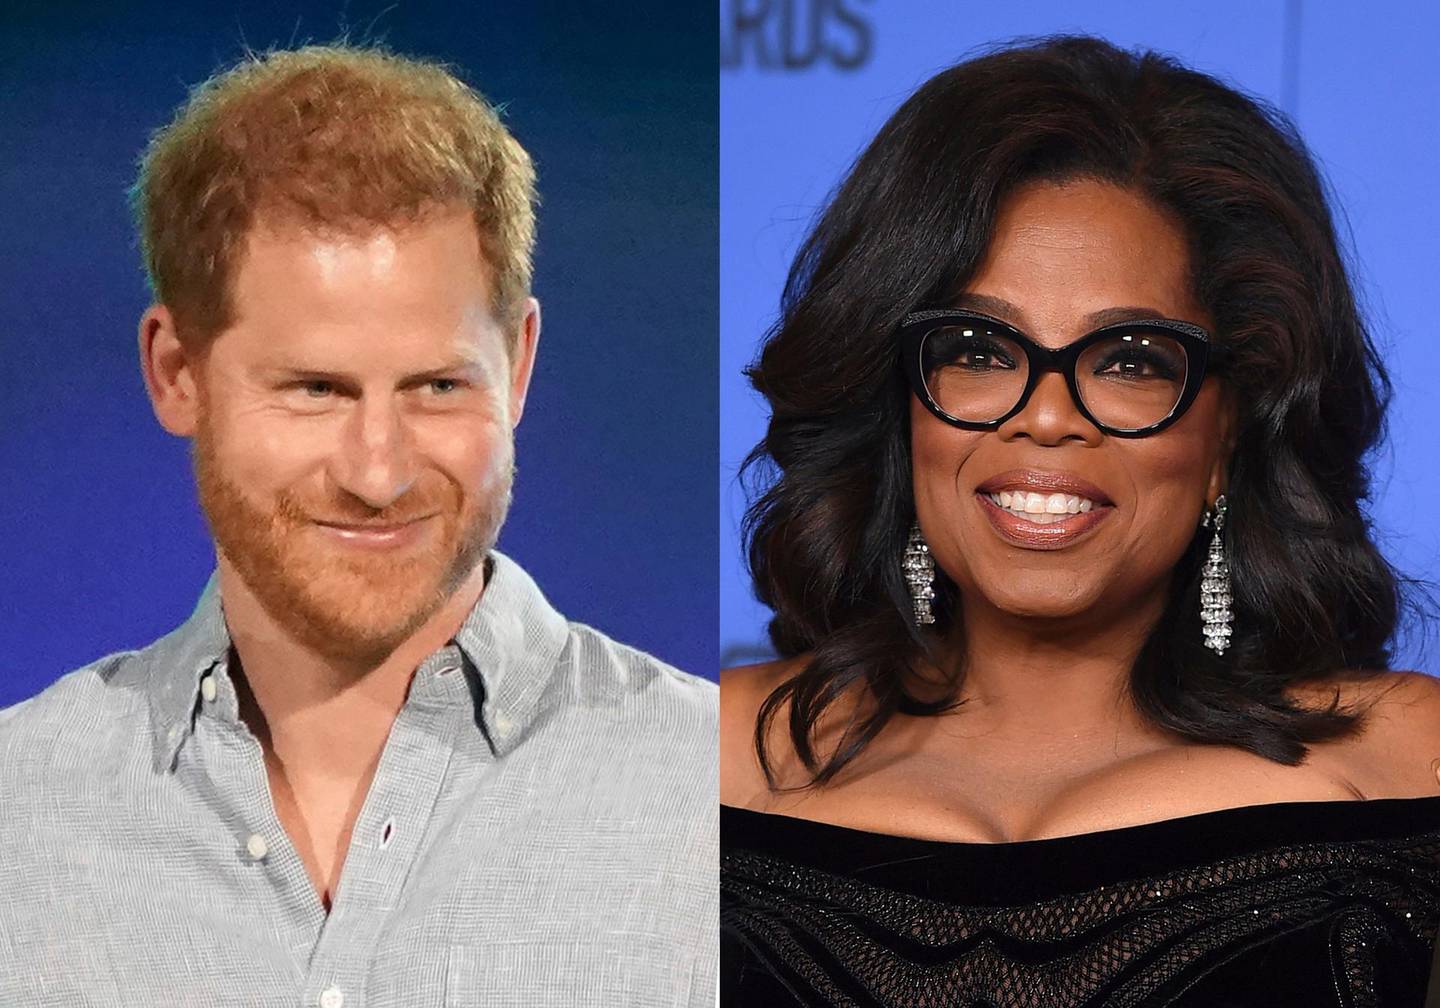 Prince Harry, Duke of Sussex speaks at "Vax Live: The Concert to Reunite the World" in Inglewood, Calif. on May 2, 2021, left, and  Oprah Winfrey appears at the 75th annual Golden Globe Awards in Beverly Hills, Calif. on Jan. 7, 2018. Winfrey and Prince Harry are teaming up for a series that will delve into mental health issues and feature segments from athletes and stars like Lady Gaga and Glenn Close. The streaming service Apple TV+ plus announced Monday that the multi-part documentary series â€œThe Me You Canâ€™t Seeâ€ will debut on May 21. (AP Photo)